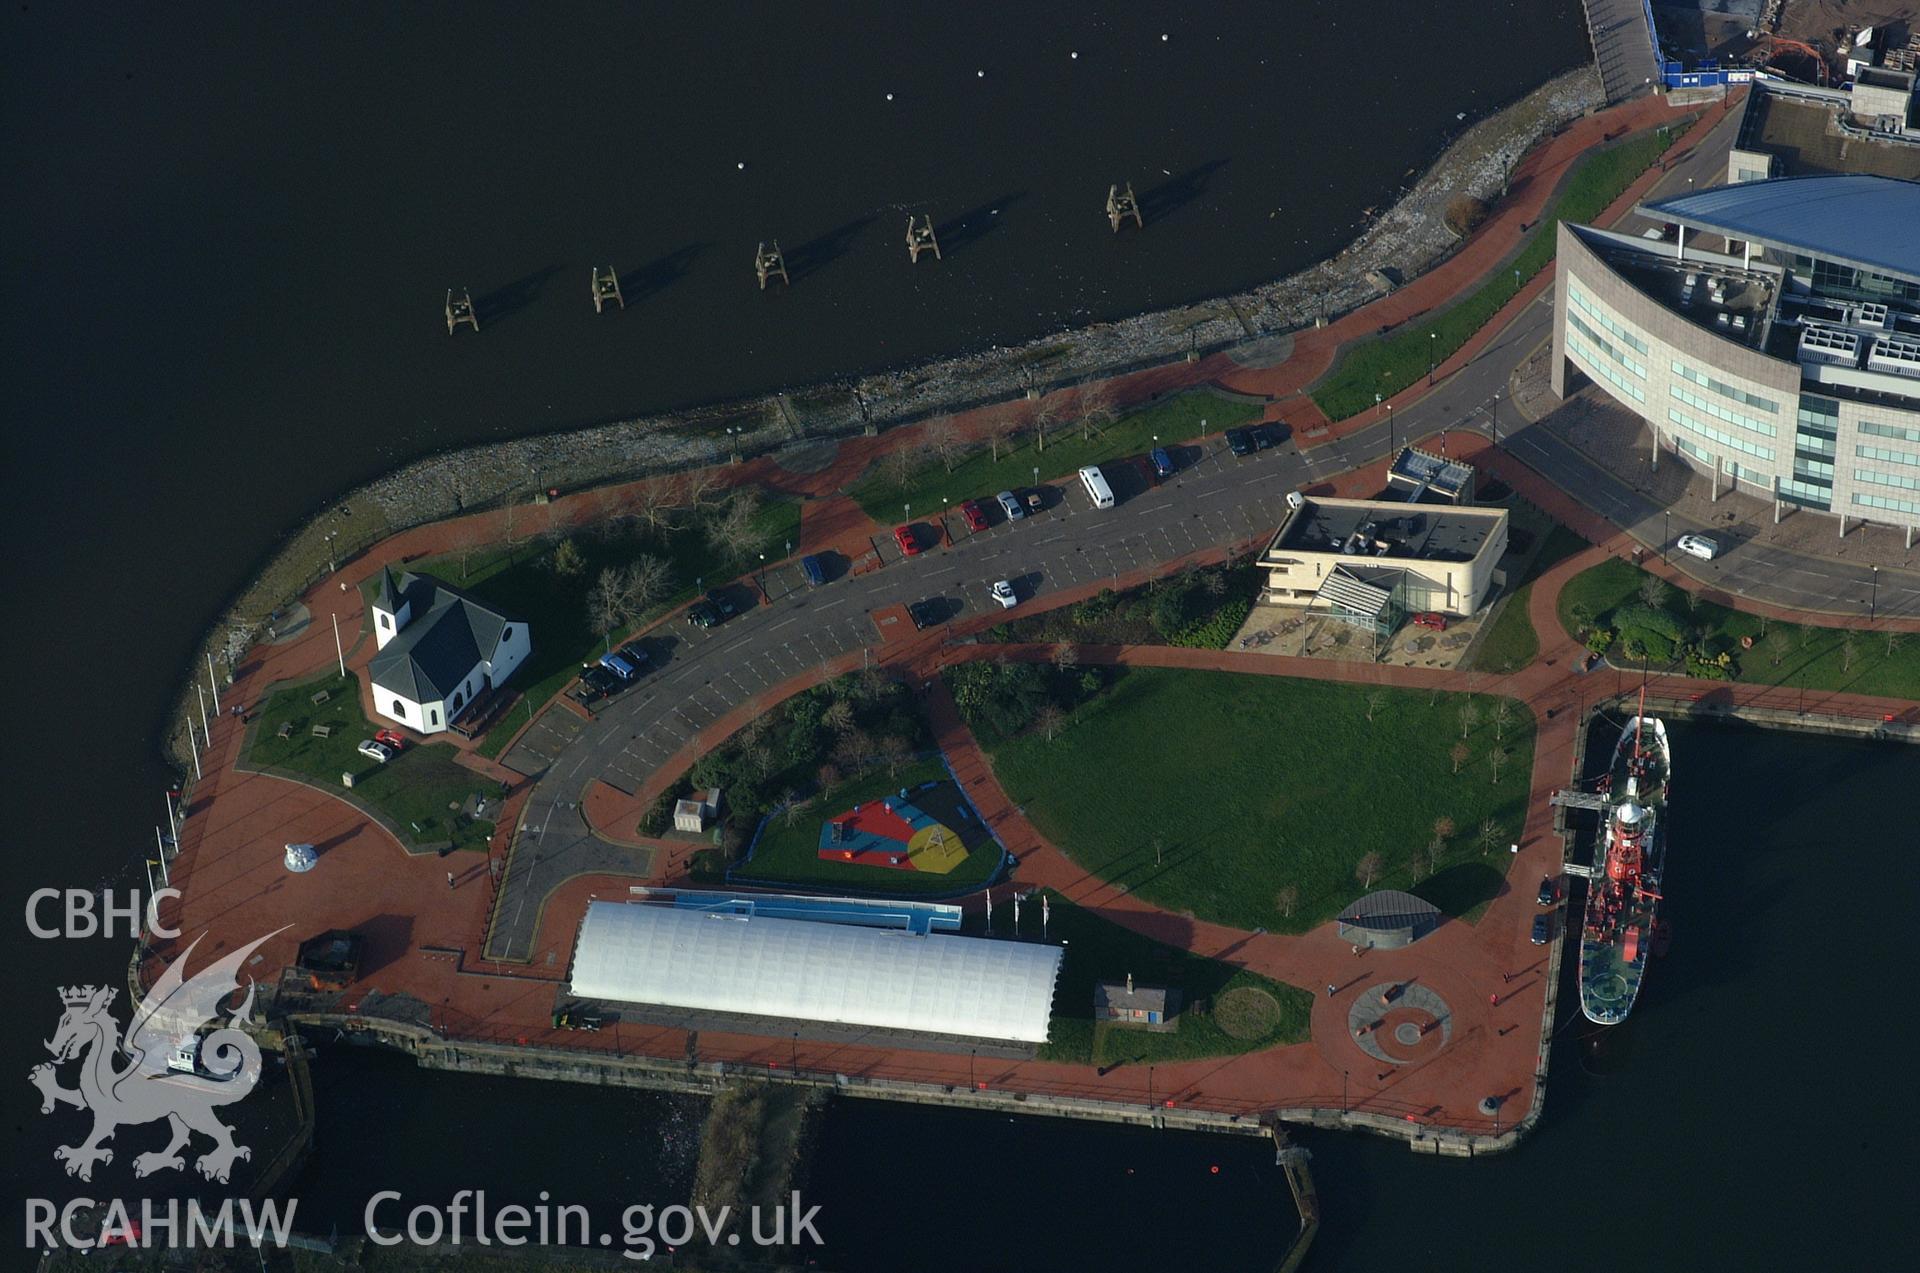 RCAHMW colour oblique aerial photograph of Norwegian Church, Bute East Dock, Cardiff taken on 13/01/2005 by Toby Driver